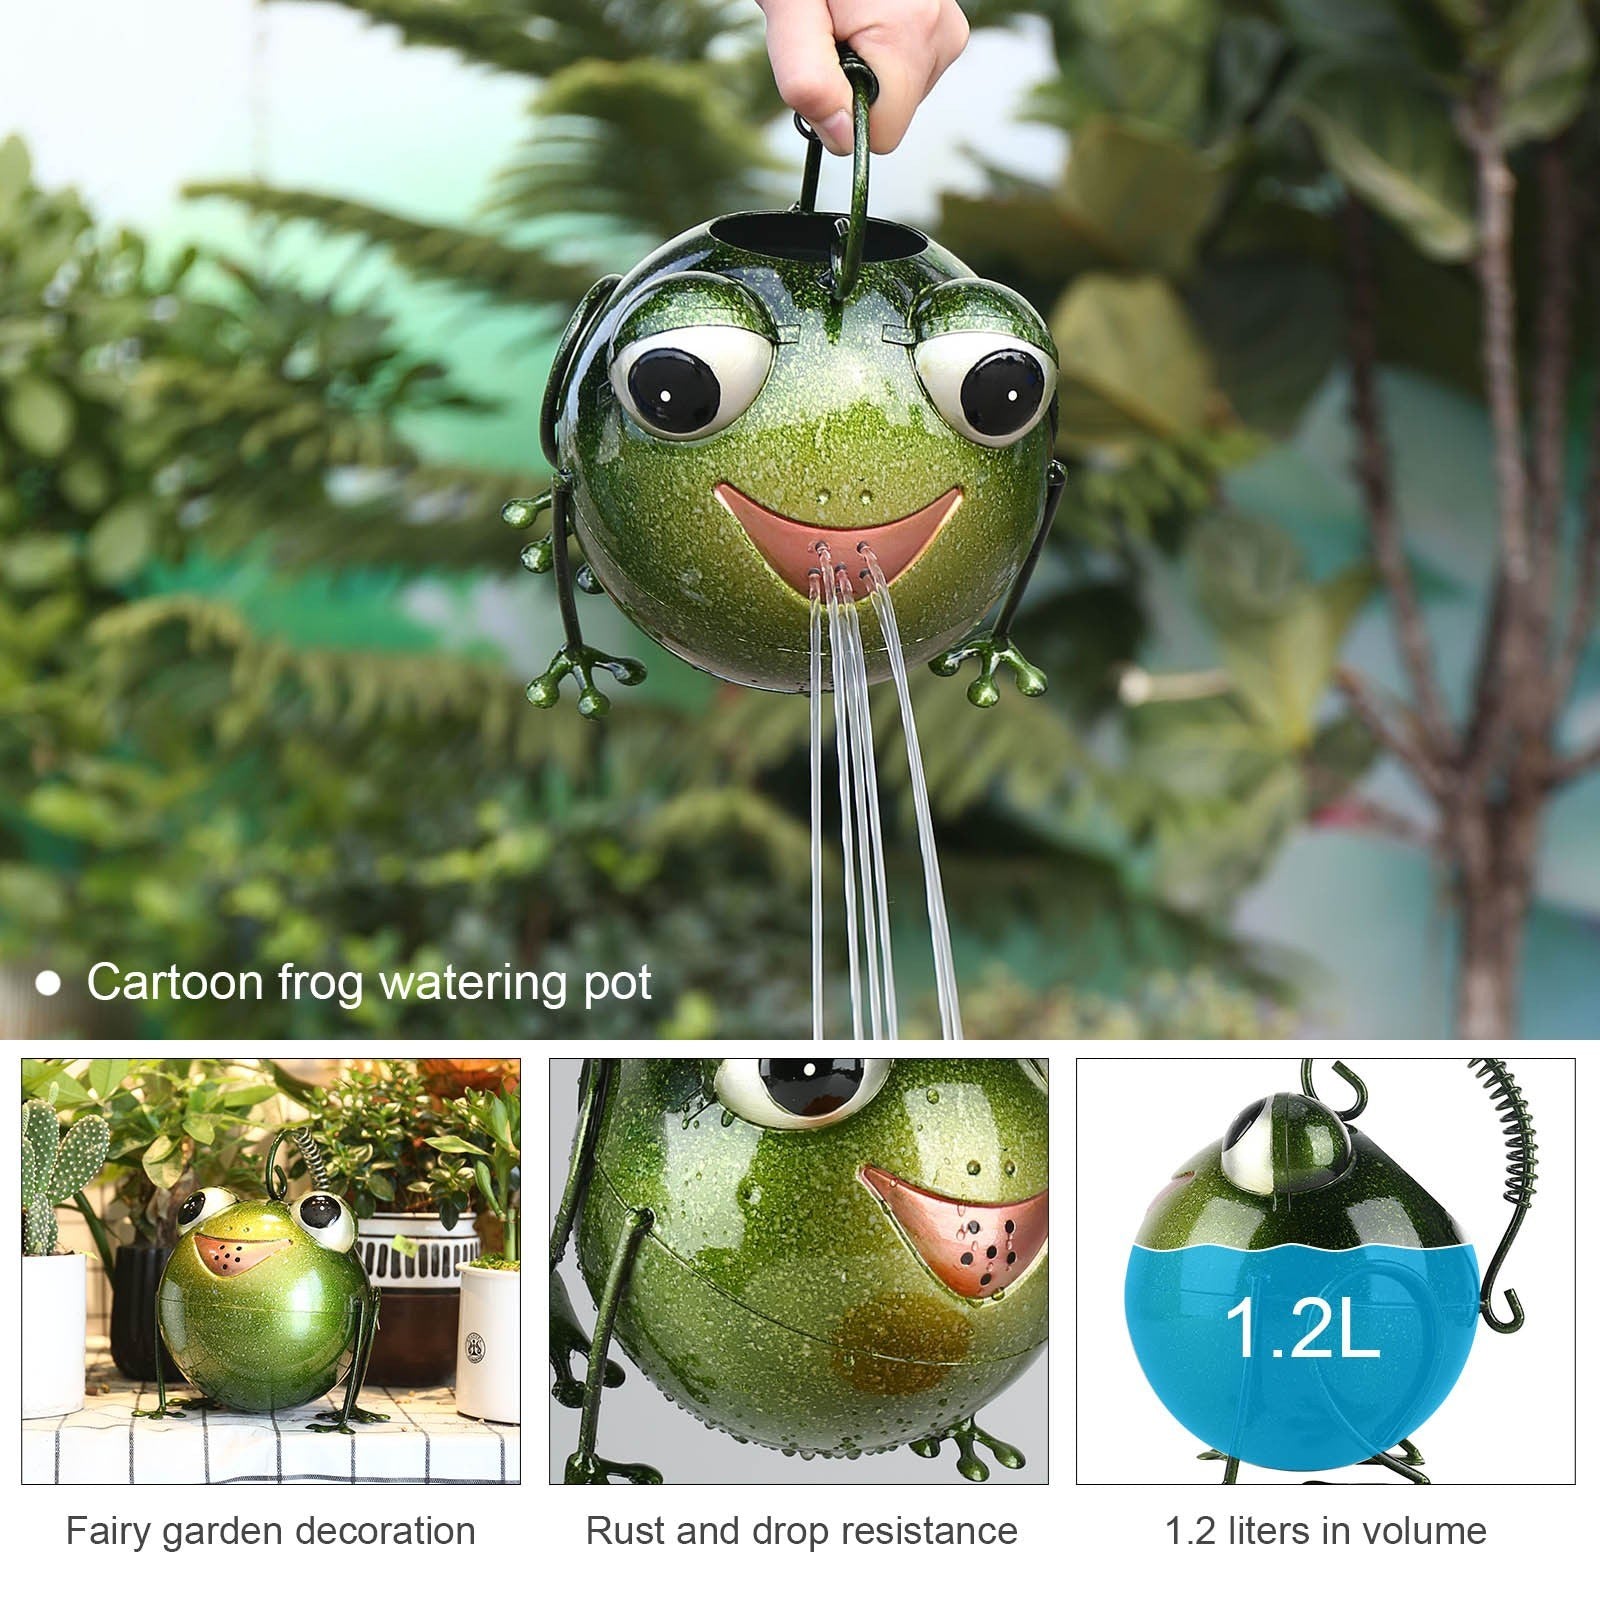 You've found cutest watering pot around for garden or indoor decor!